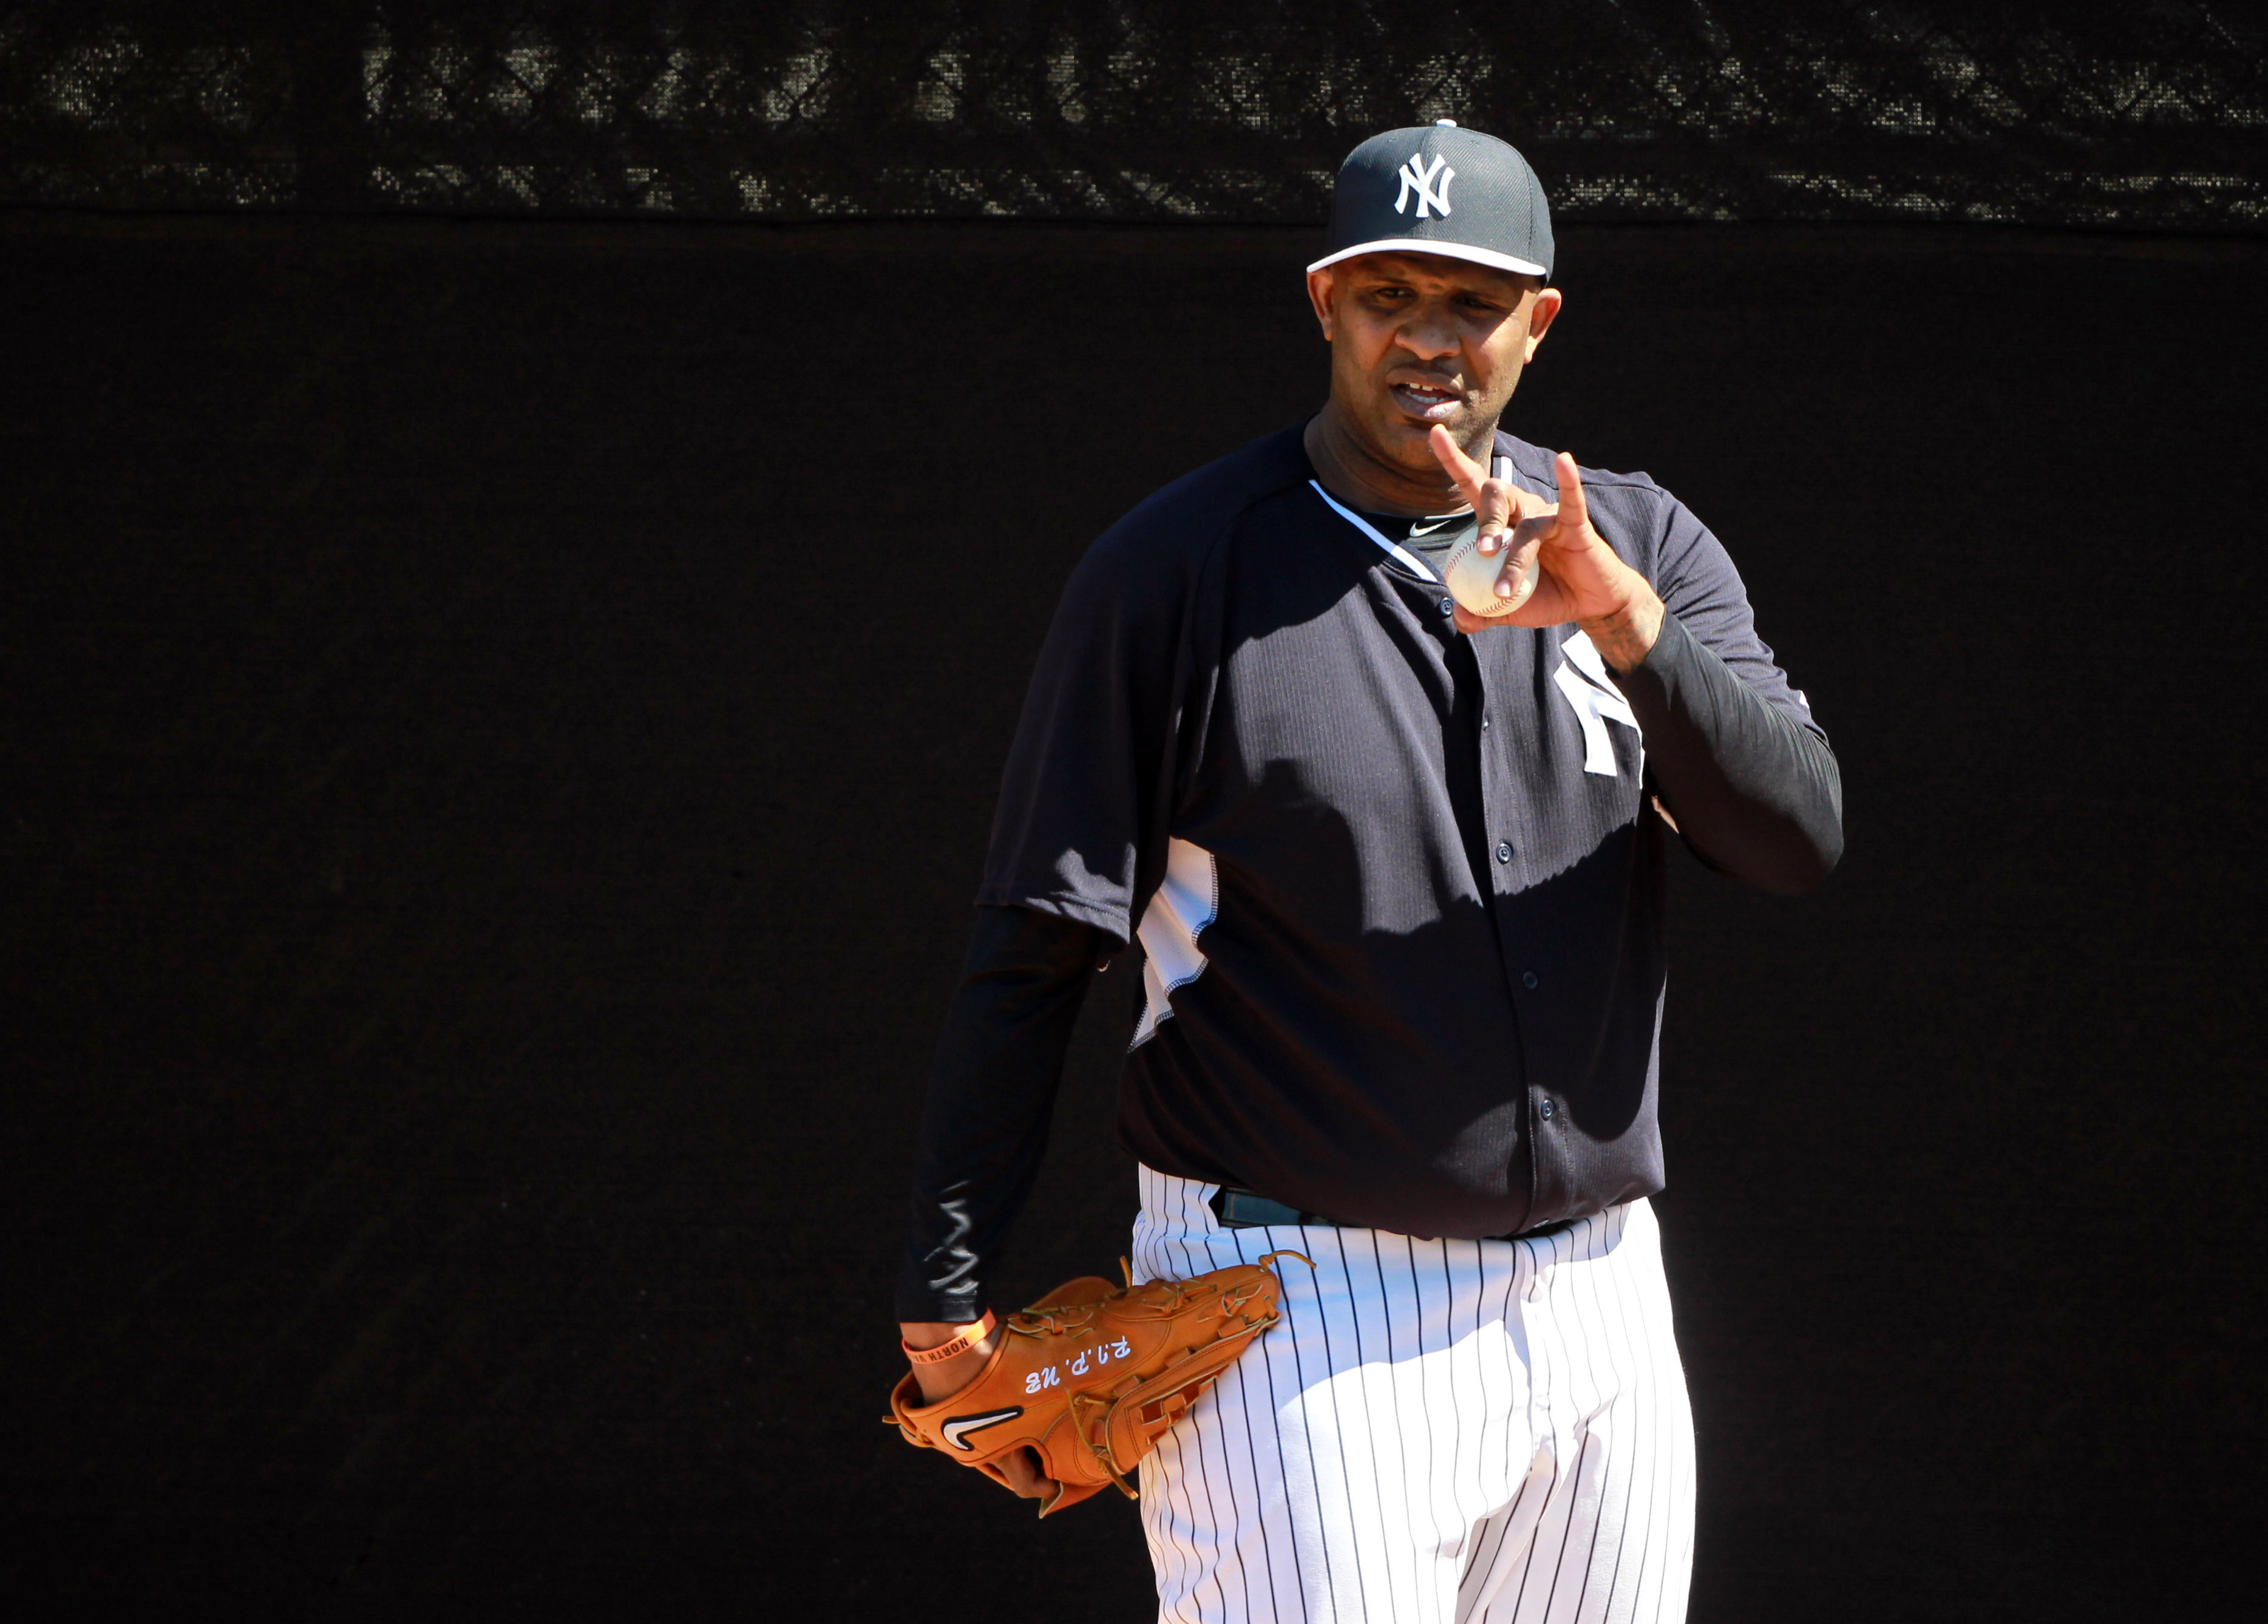 CC Sabathia got serious about weight loss after cousin died young